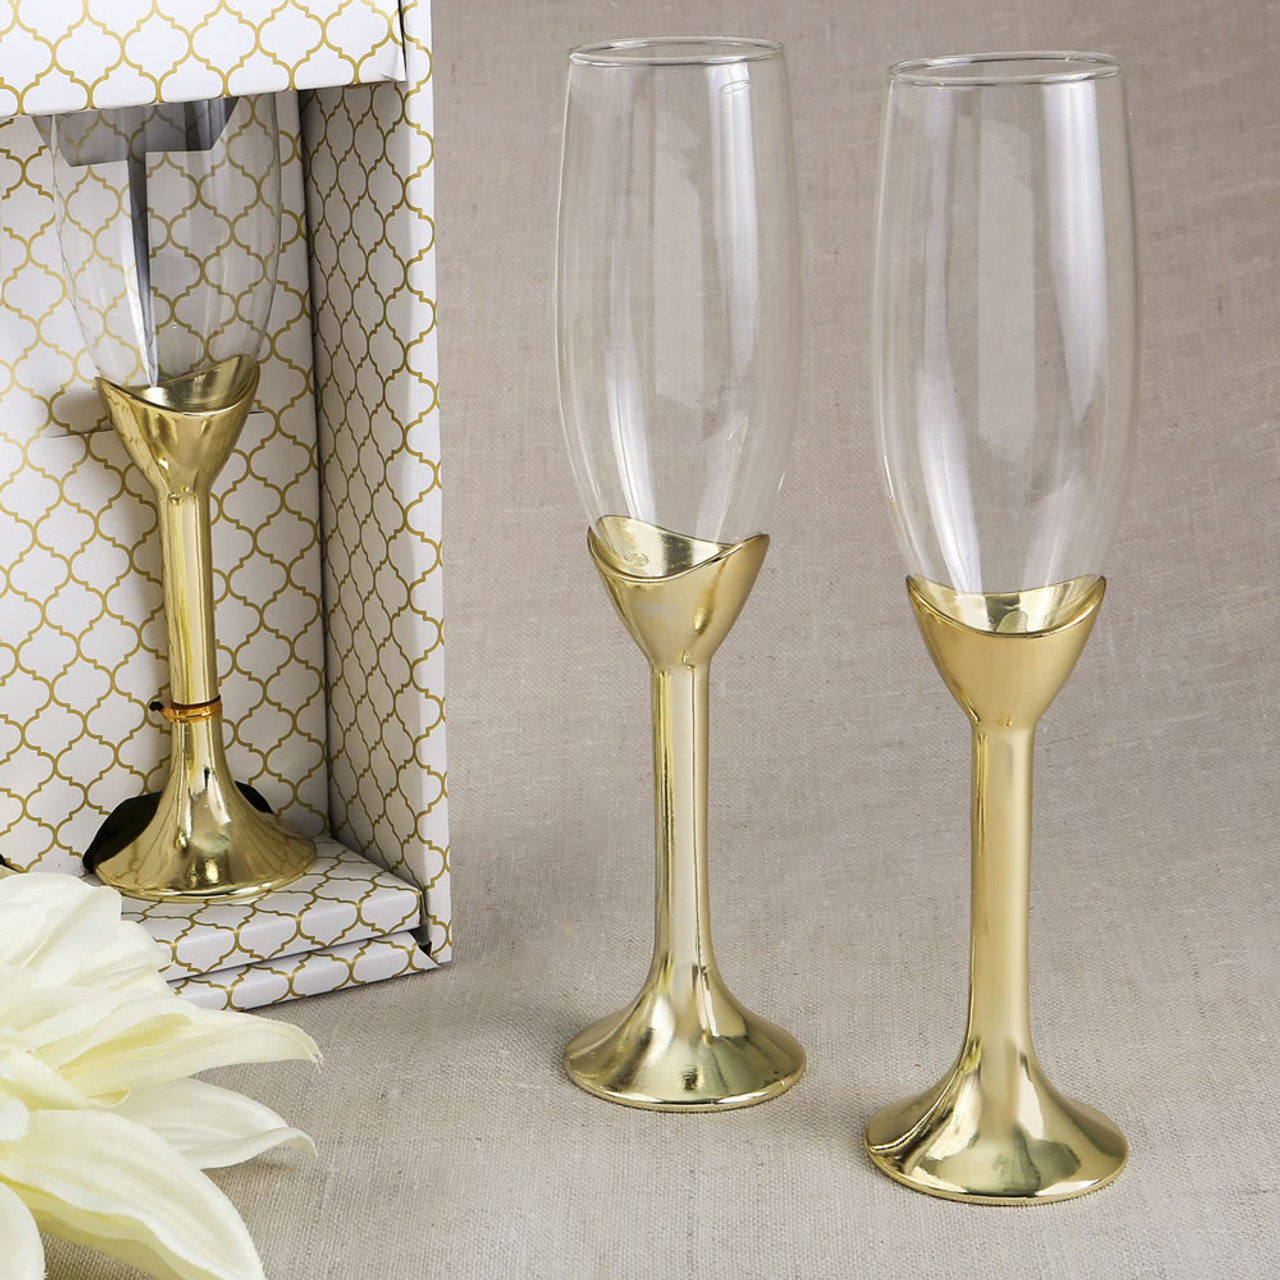 Champagne Flutes Set Of 2 With Gold Plated Stems